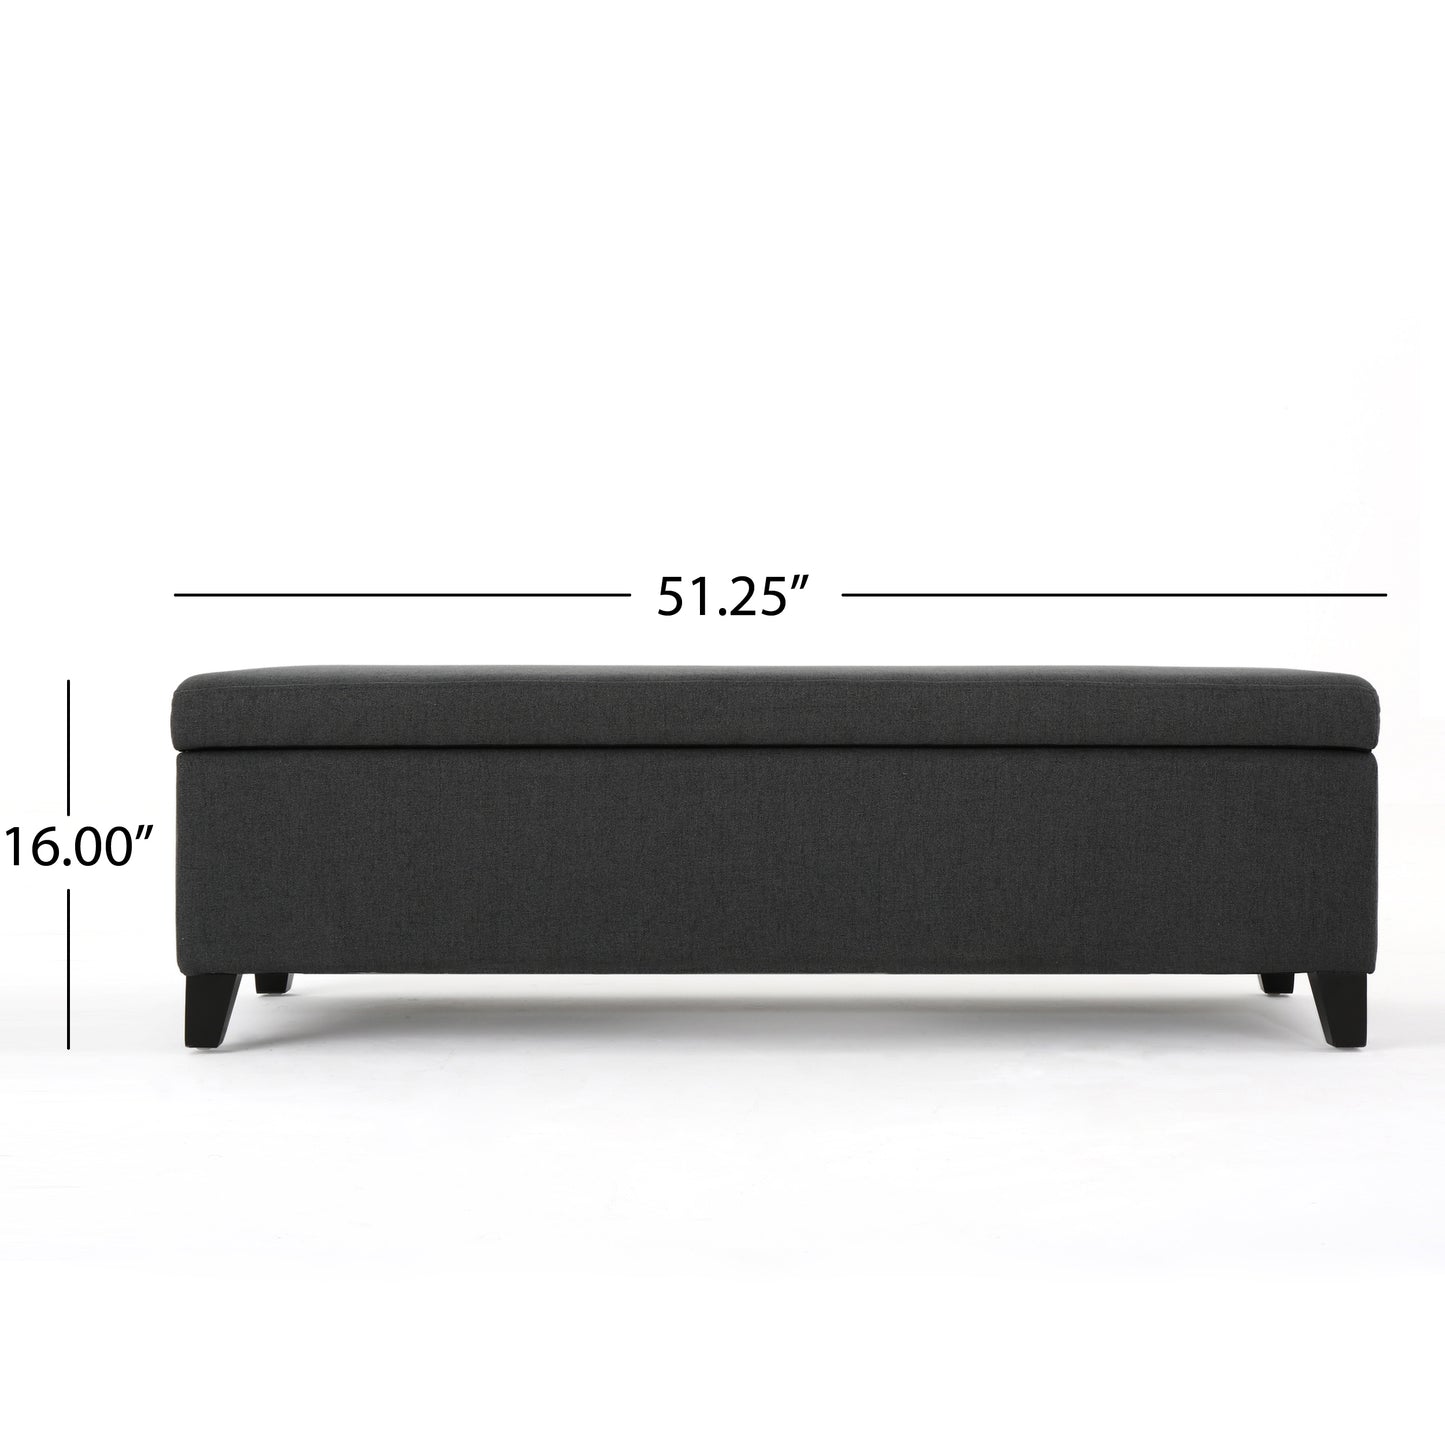 Annis Rectangle Fabric Storage Ottoman Bench